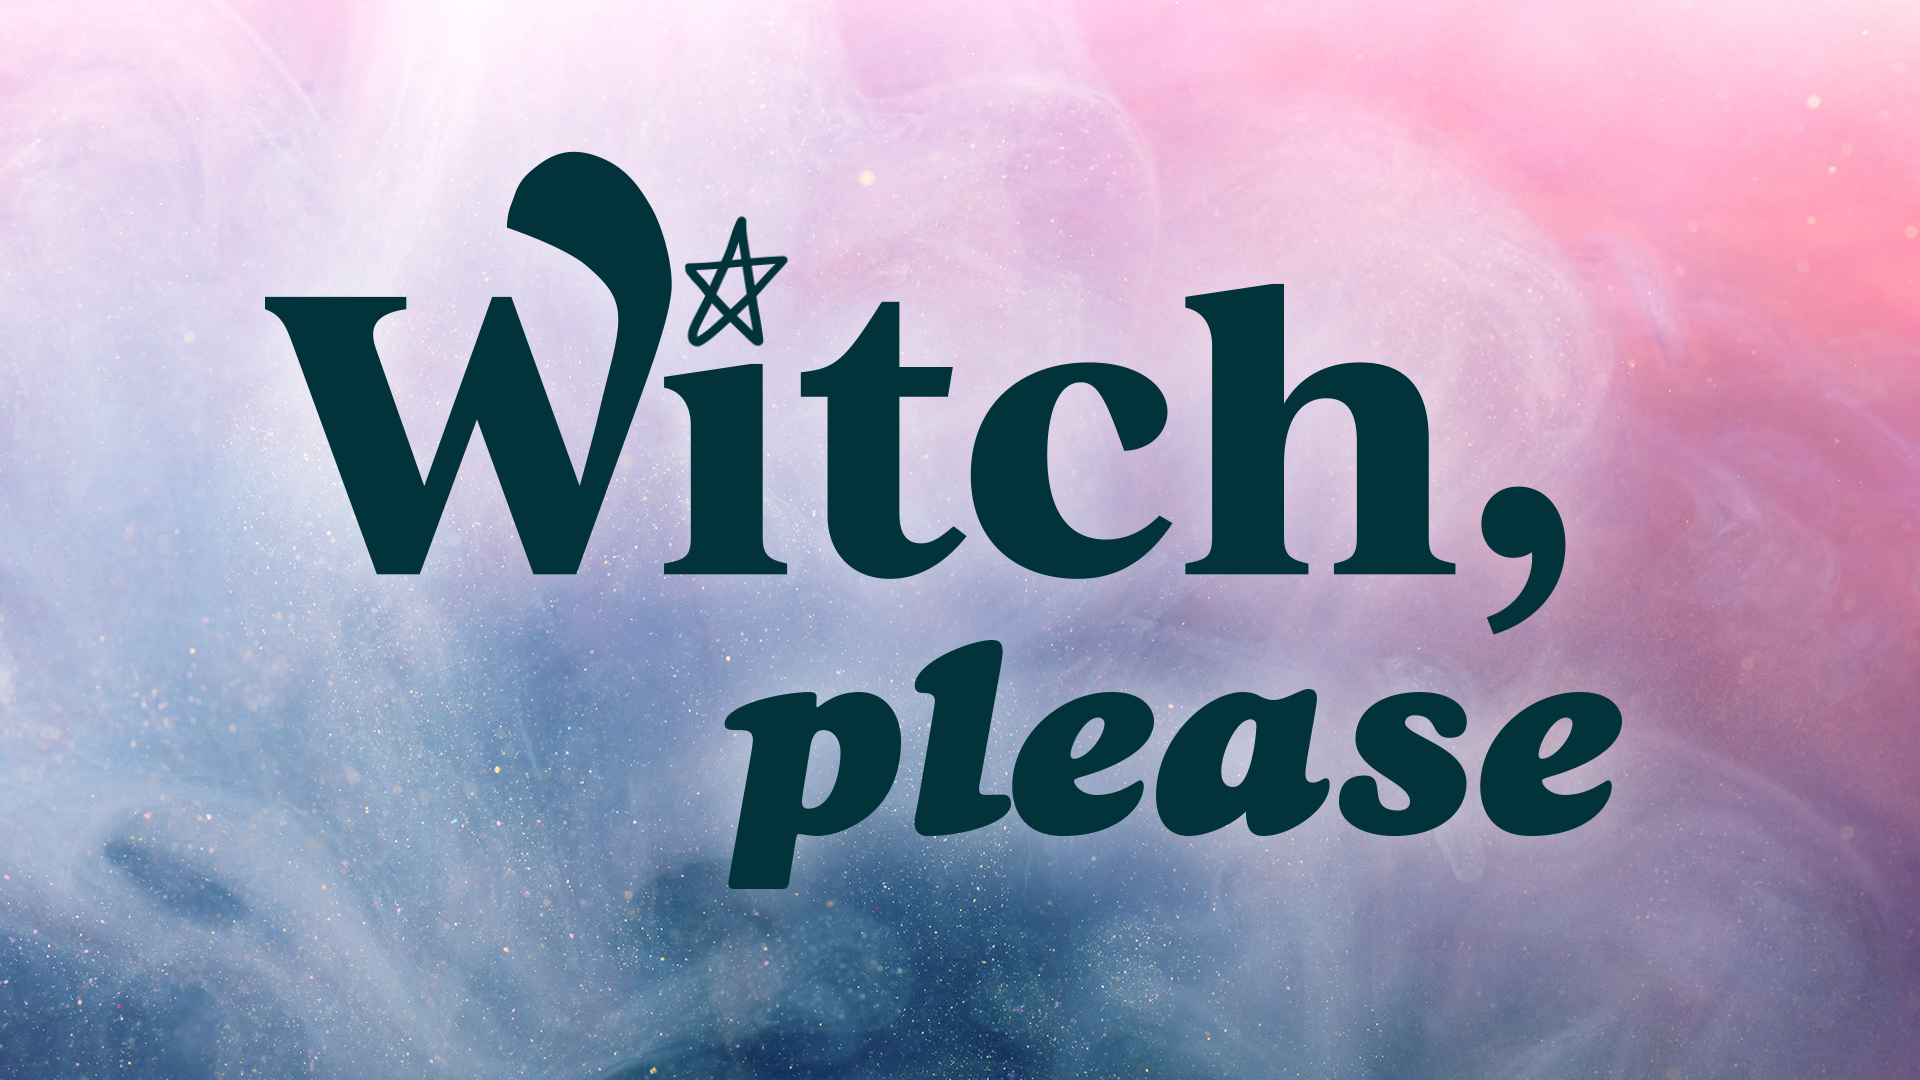 Please wallpaper witch HD Gaming